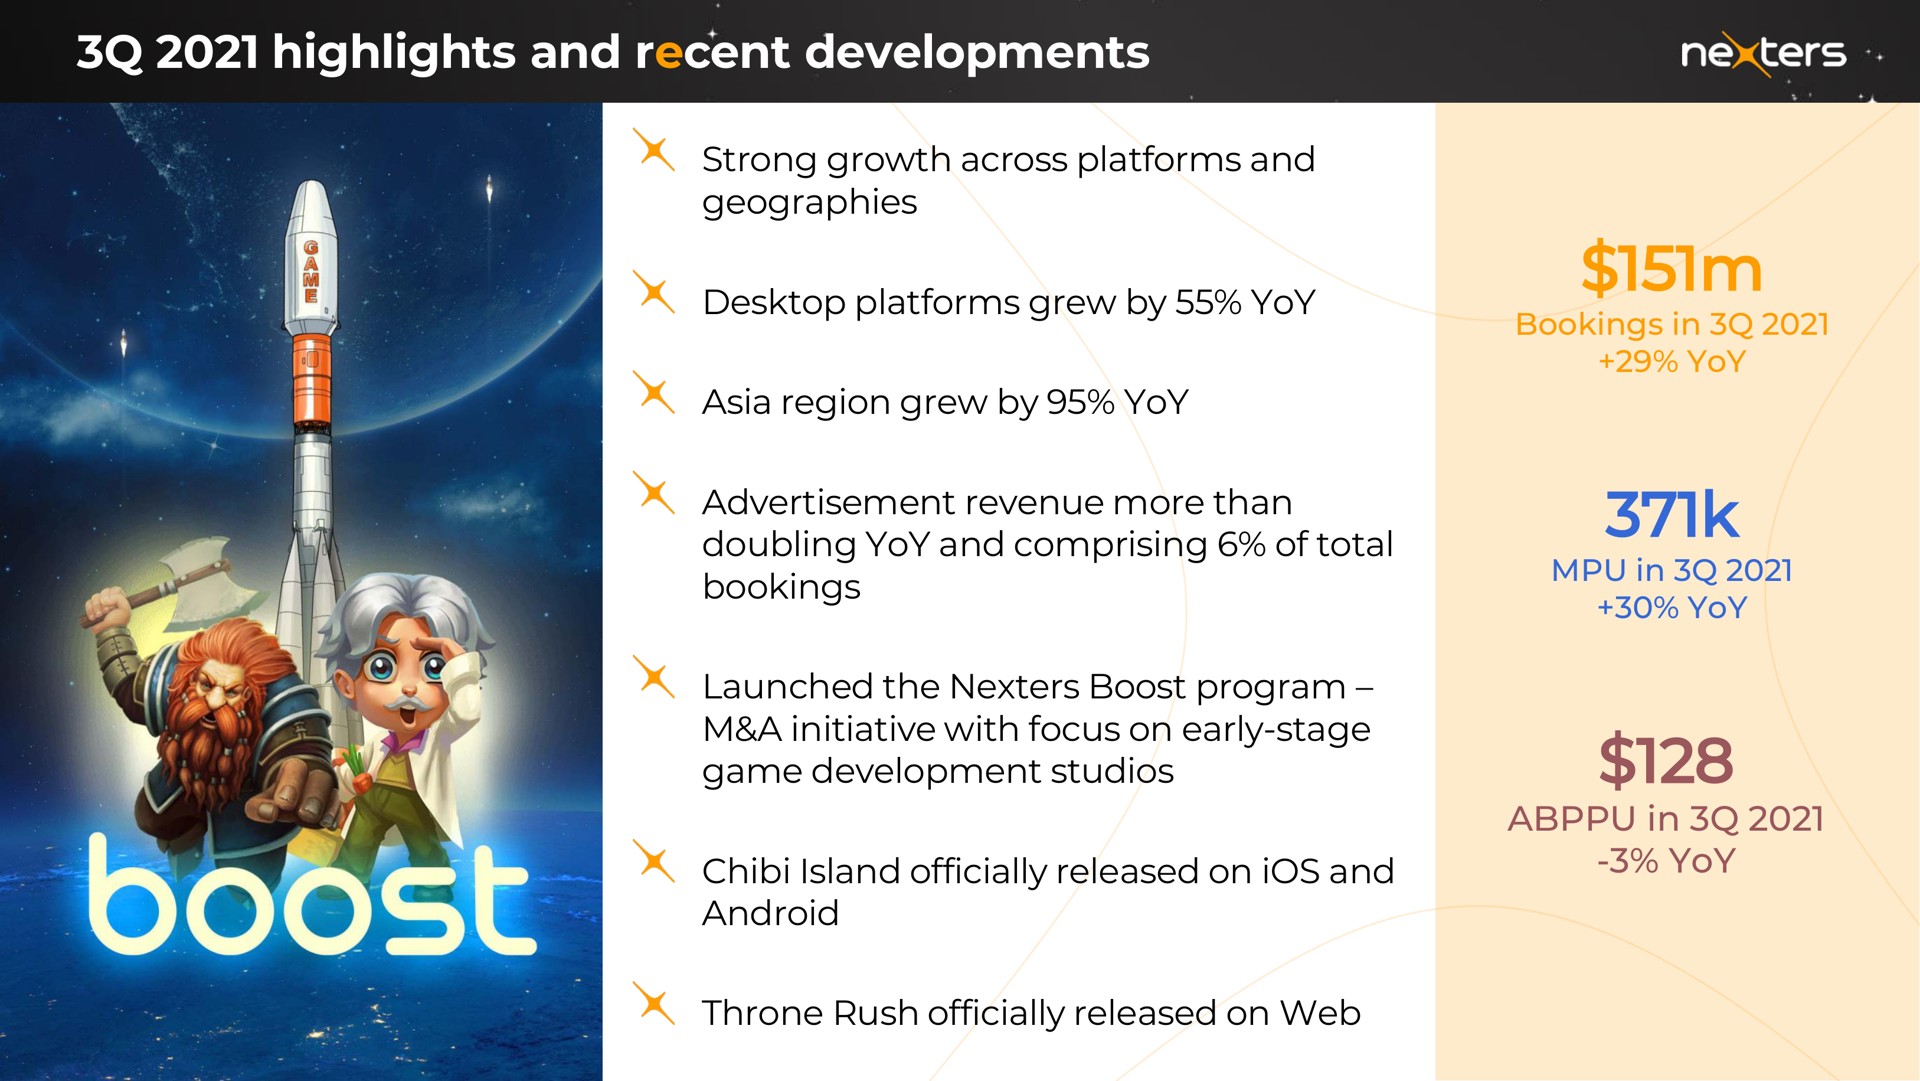 highlights and recent developments strong growth across platforms and geographies platforms grew by yoy region grew by yoy bookings in yoy advertisement revenue more than doubling yoy and comprising of total bookings in yoy launched the boost program a initiative with focus on early stage game development studios island officially released on ios and android in yoy throne rush officially released on web | Nexters